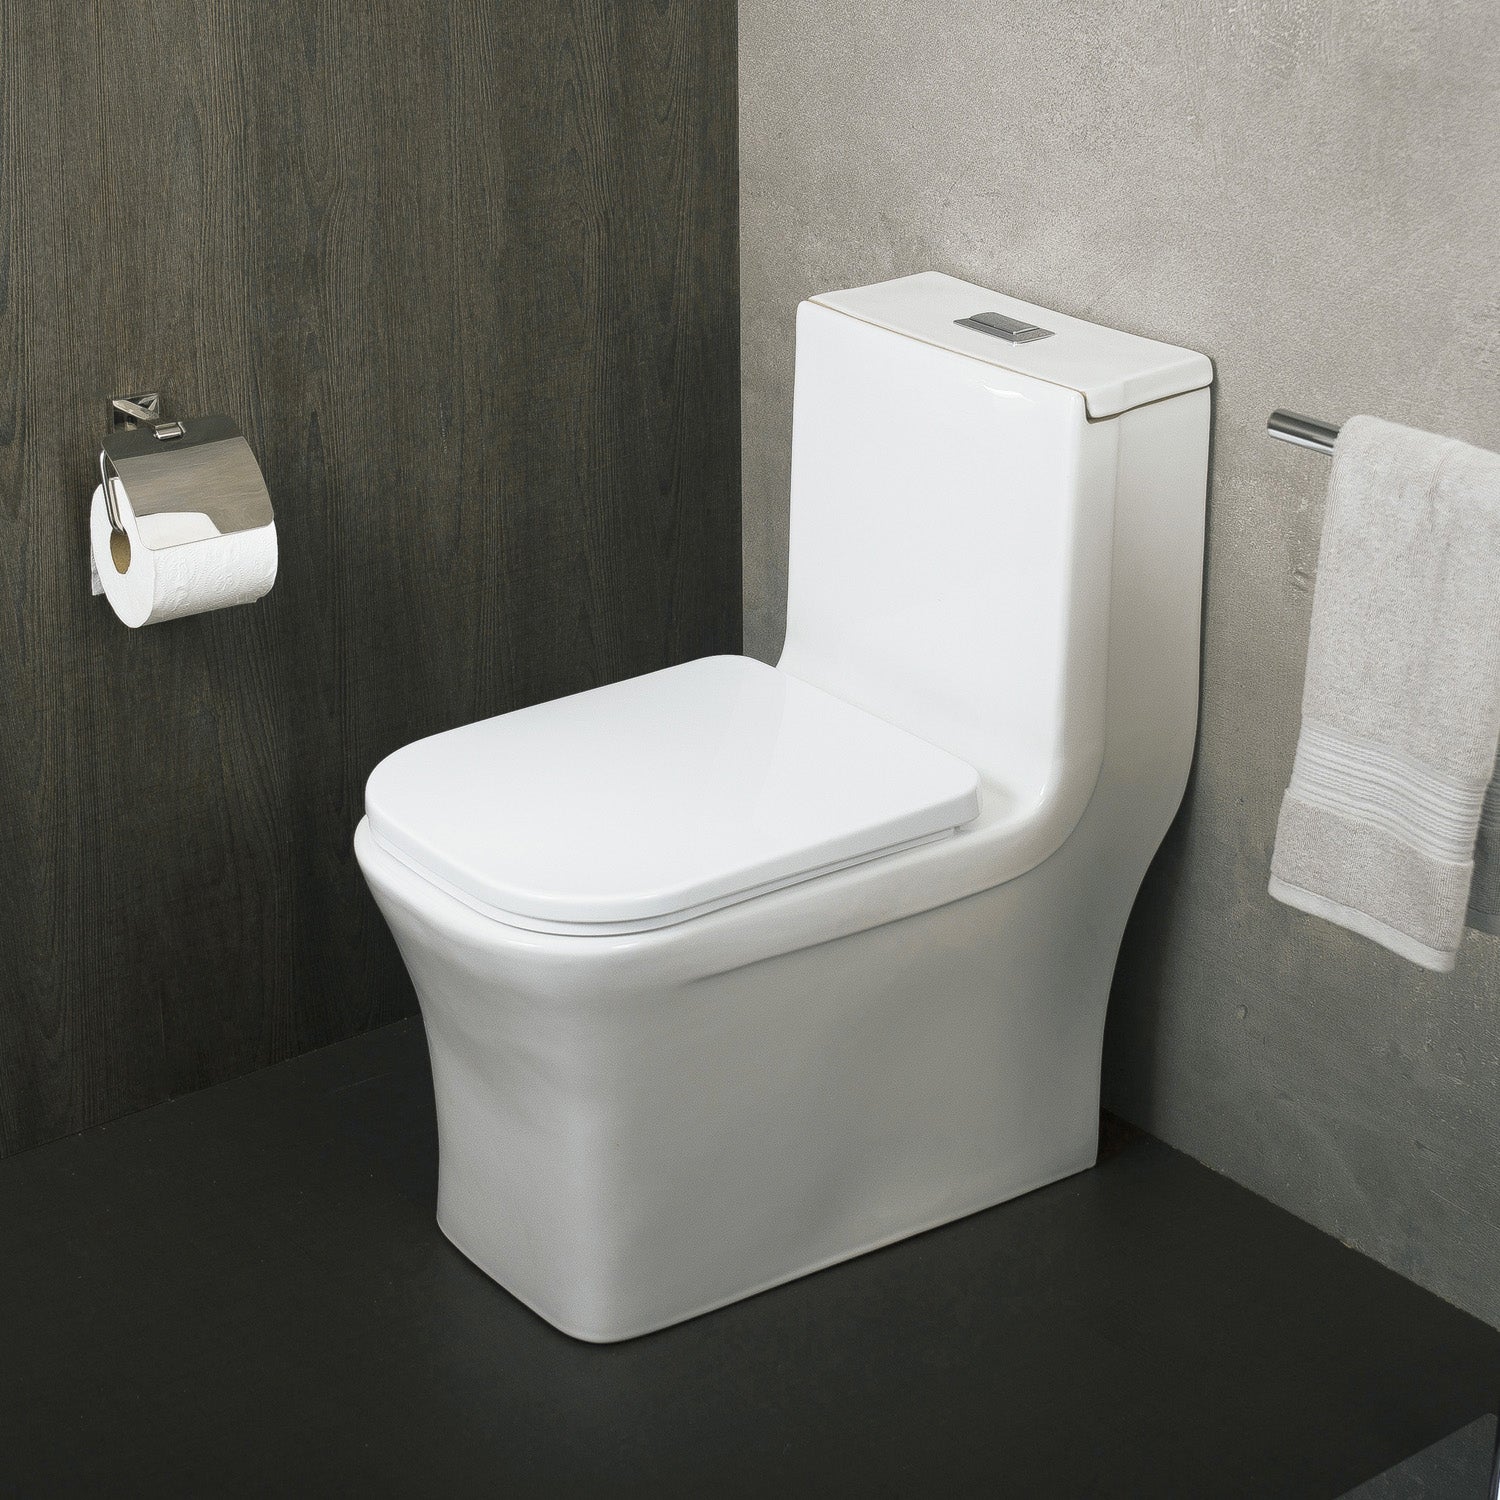 DAX One Piece Square Toilet with Soft Closing Seat and Dual Flush High-Efficiency, Porcelain, White Finish, Height 28-3/4 Inches (BSN-835)